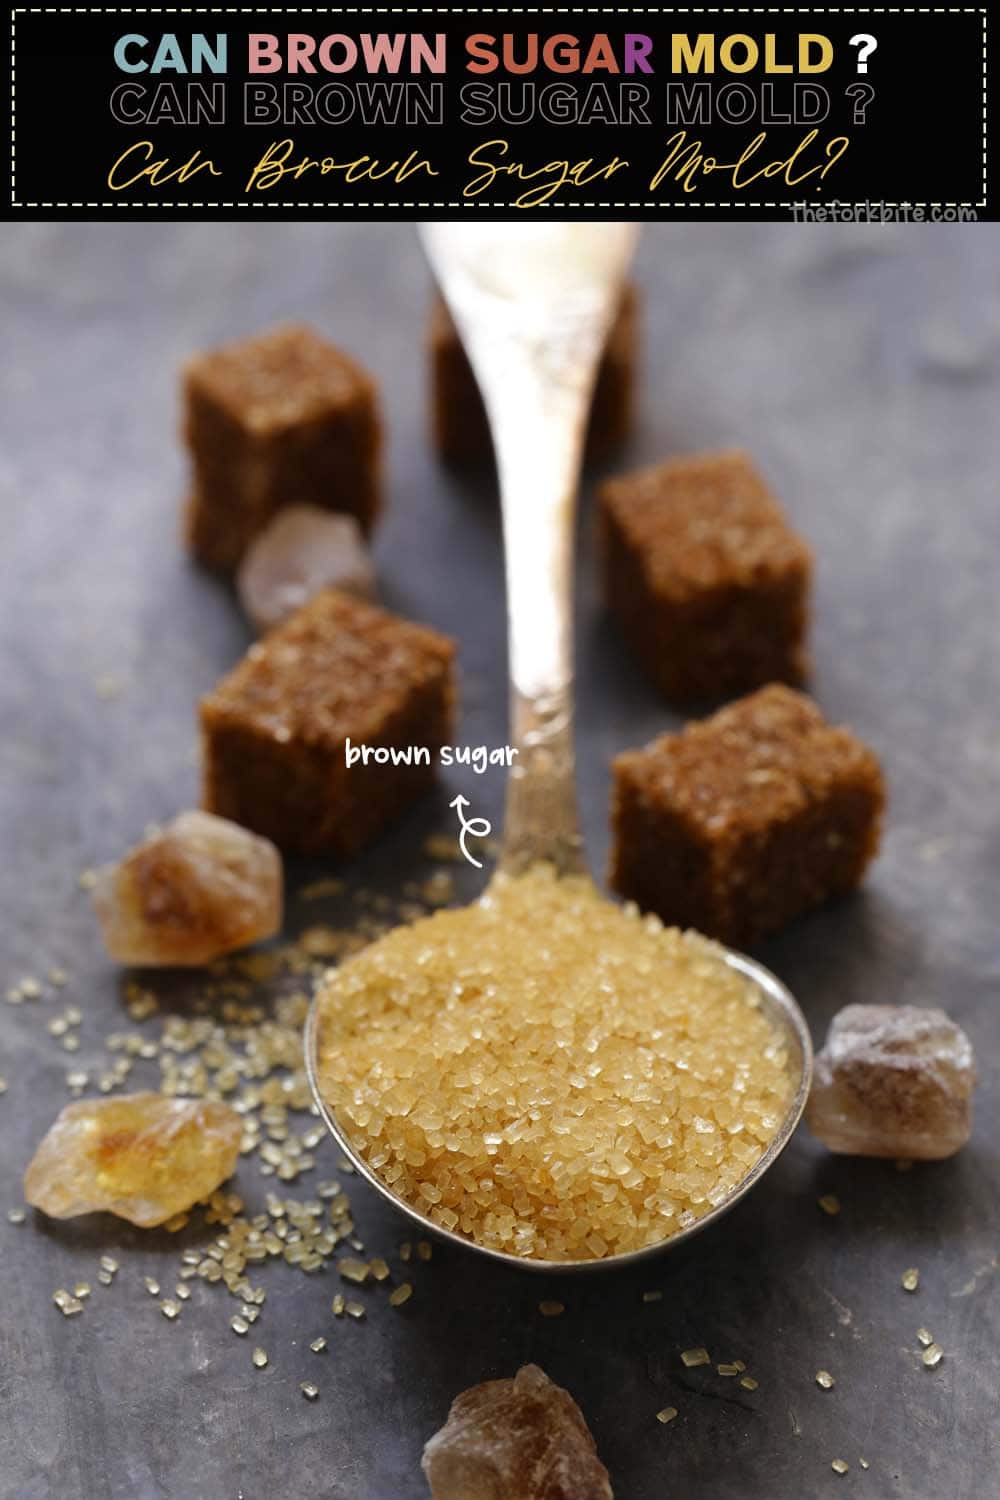 Keeping your brown sugar in good condition is all about storing it properly. Follow these tips, and you will not go far wrong.